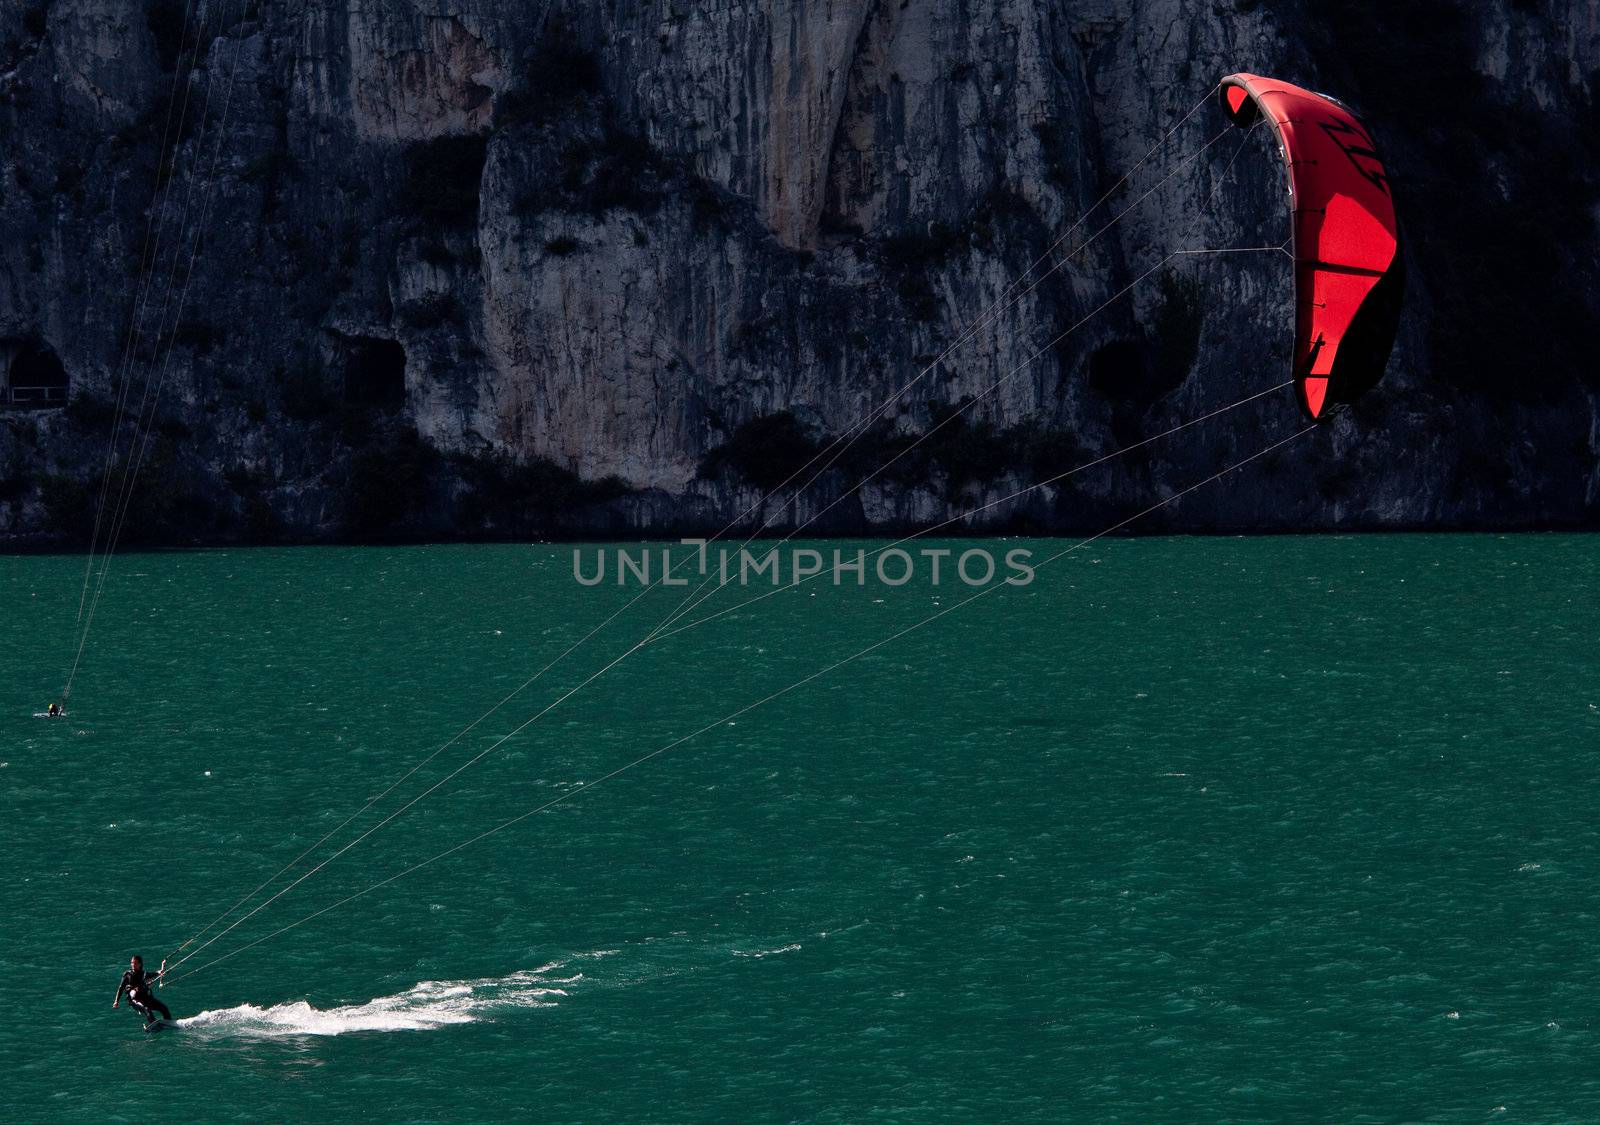 Lake Garda is famous for parasurfing because of the many winds over the water